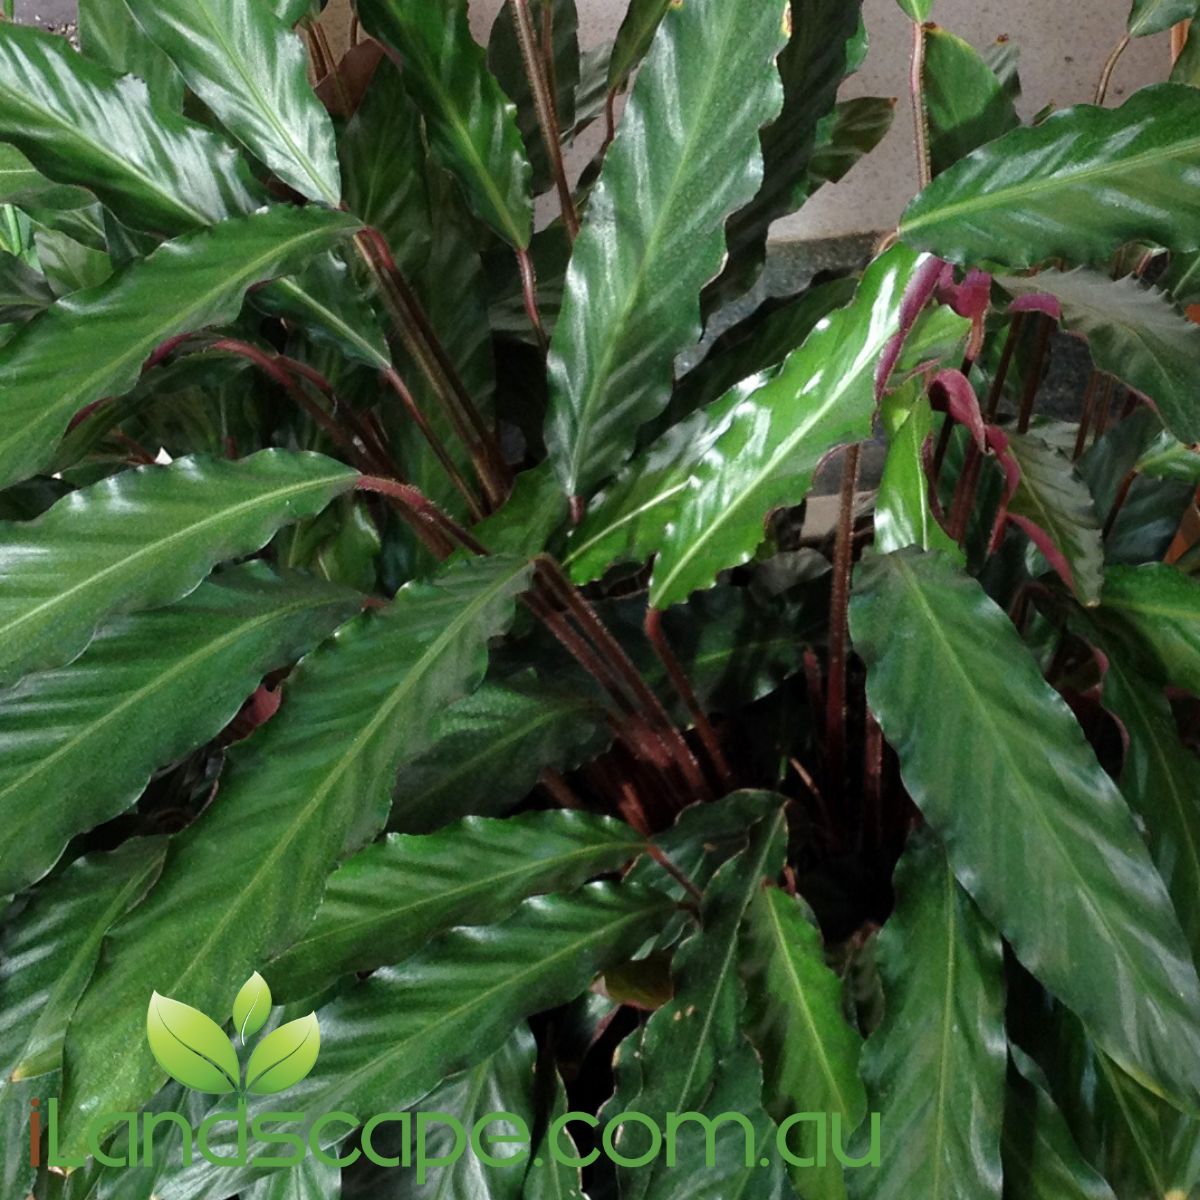 Calathea rufibarba also known as the furry feather or velvet calathea. it is a native to brazil and is most commonly grown as an indoor plant. the plants common name is due to its fuzzy, fury like under leaf texture. 